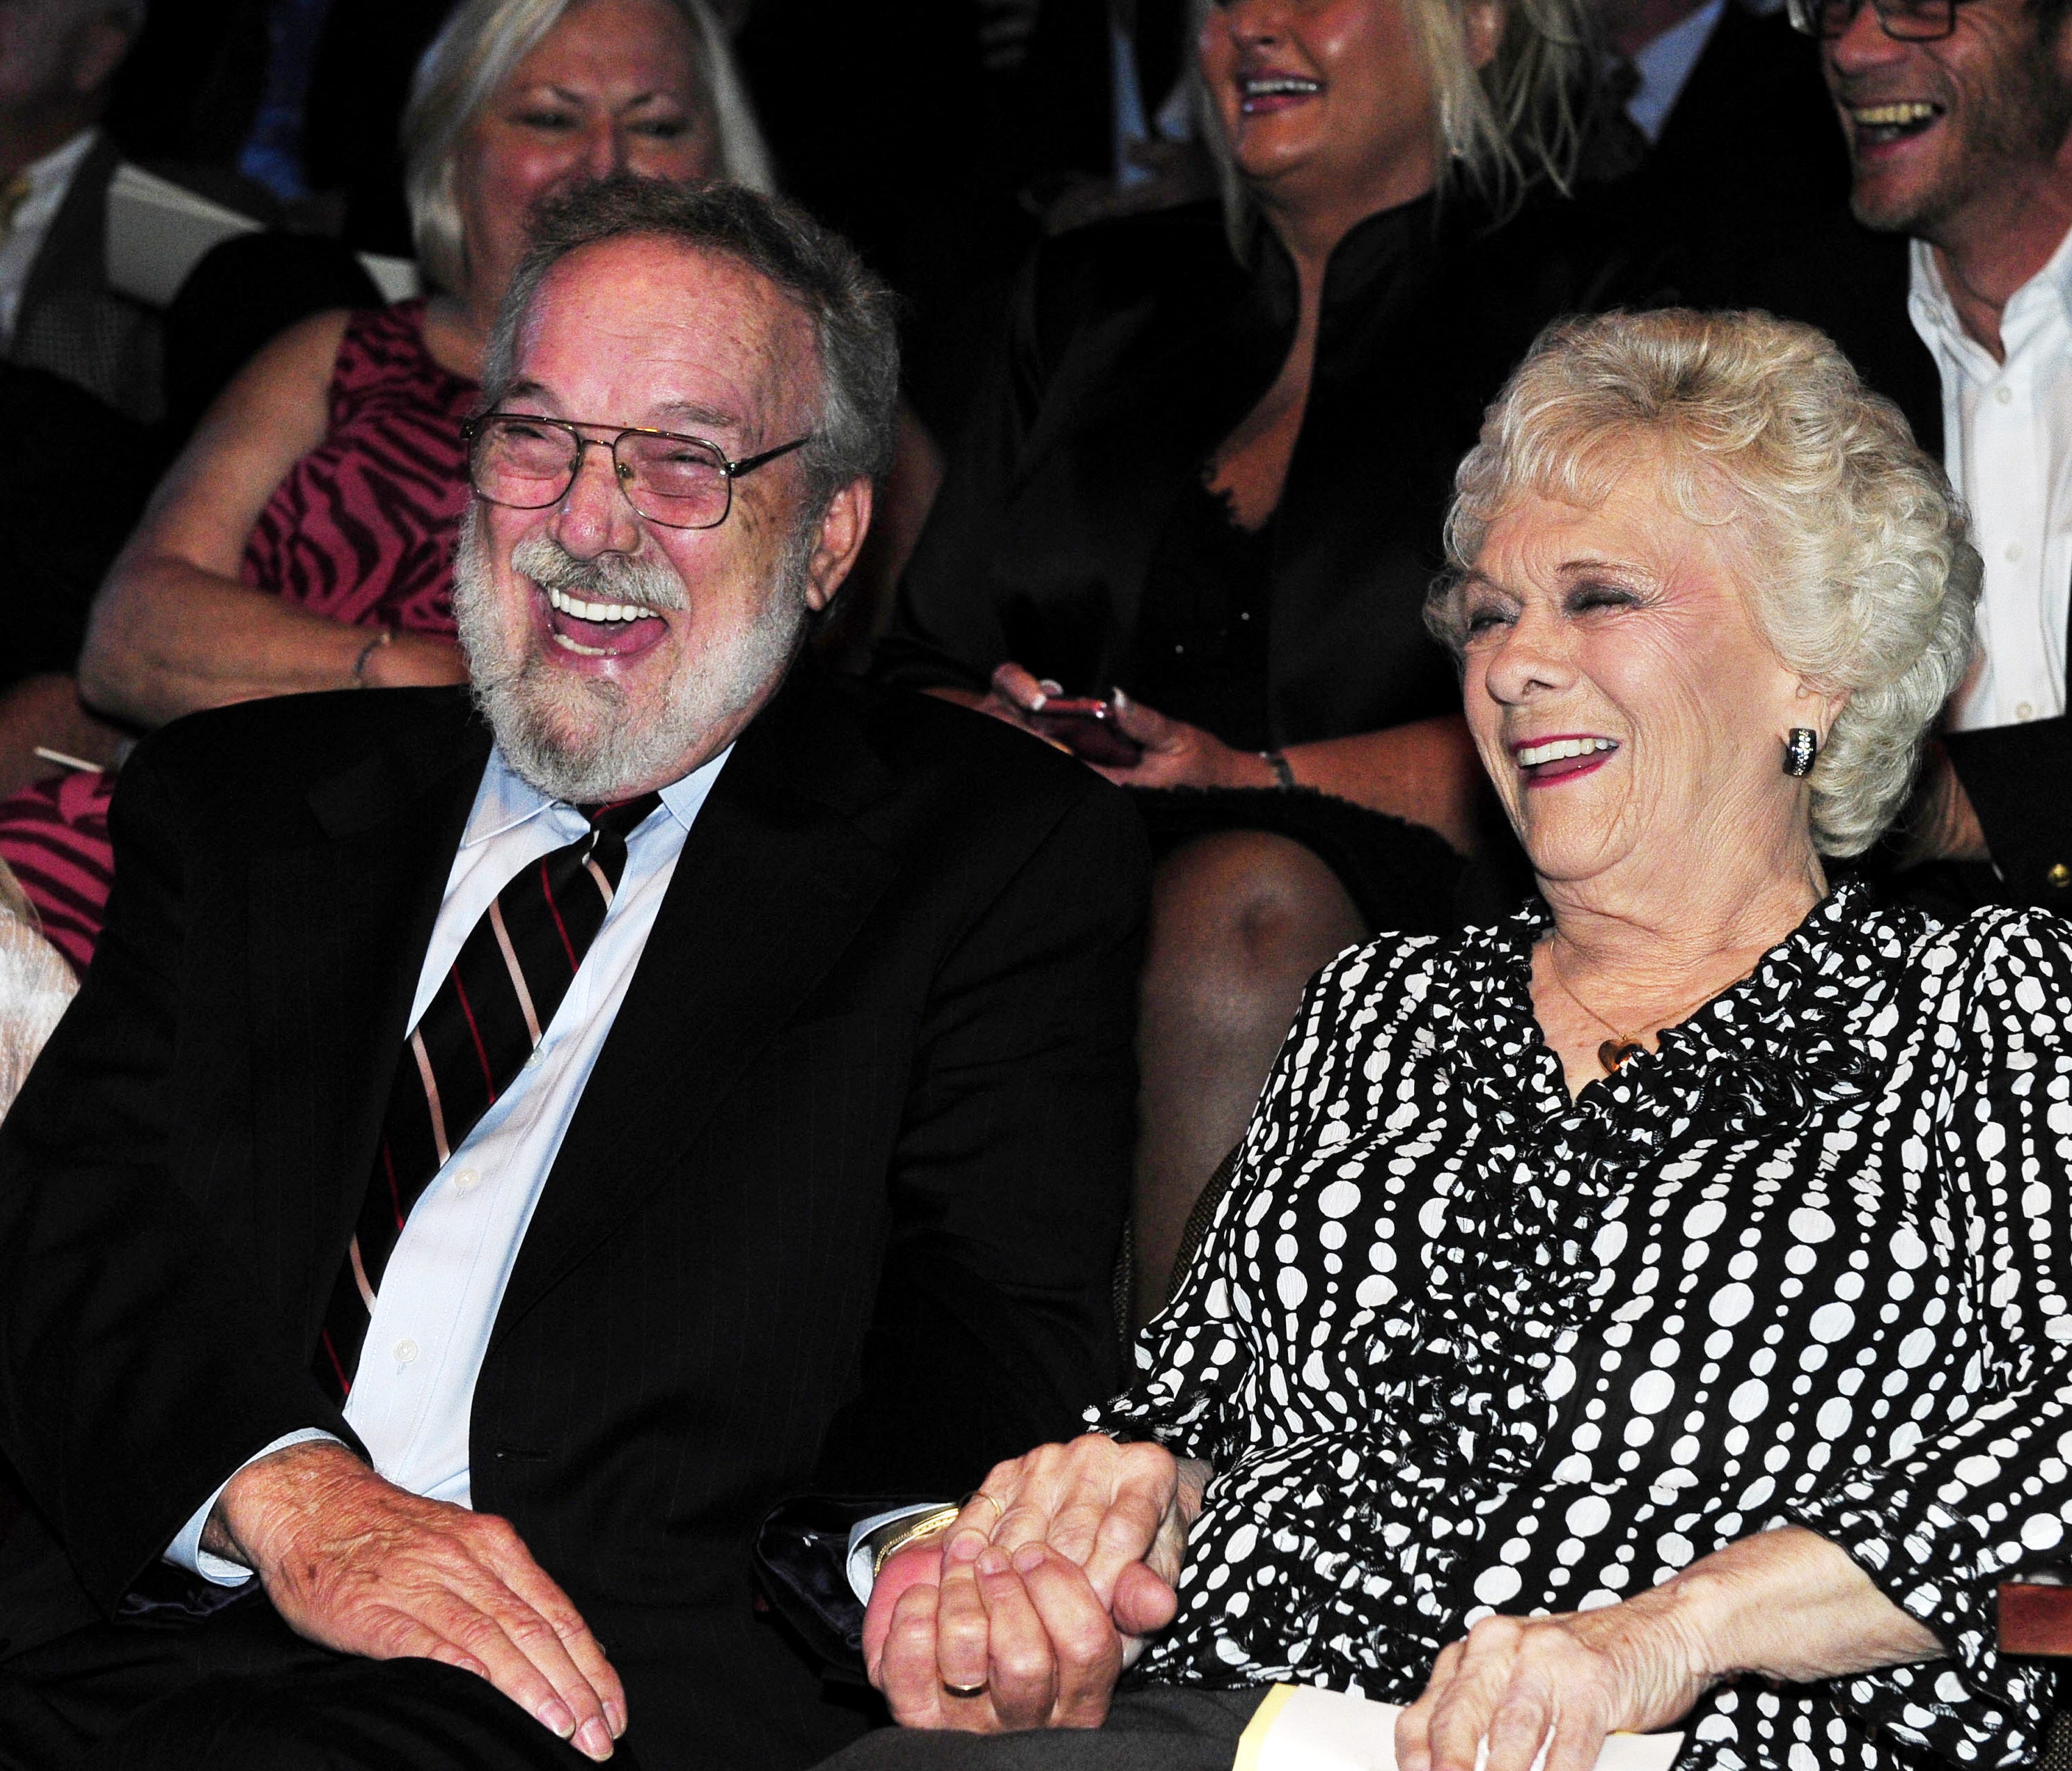 Jean Shepard laughs with her husband, Benny Birchfield, during the Hall of Fame medallion ceremony, where Shepard, Reba McEntire and Bobby Braddock were formally inducted into the Country Music Hall of Fame on May 22, 2011.